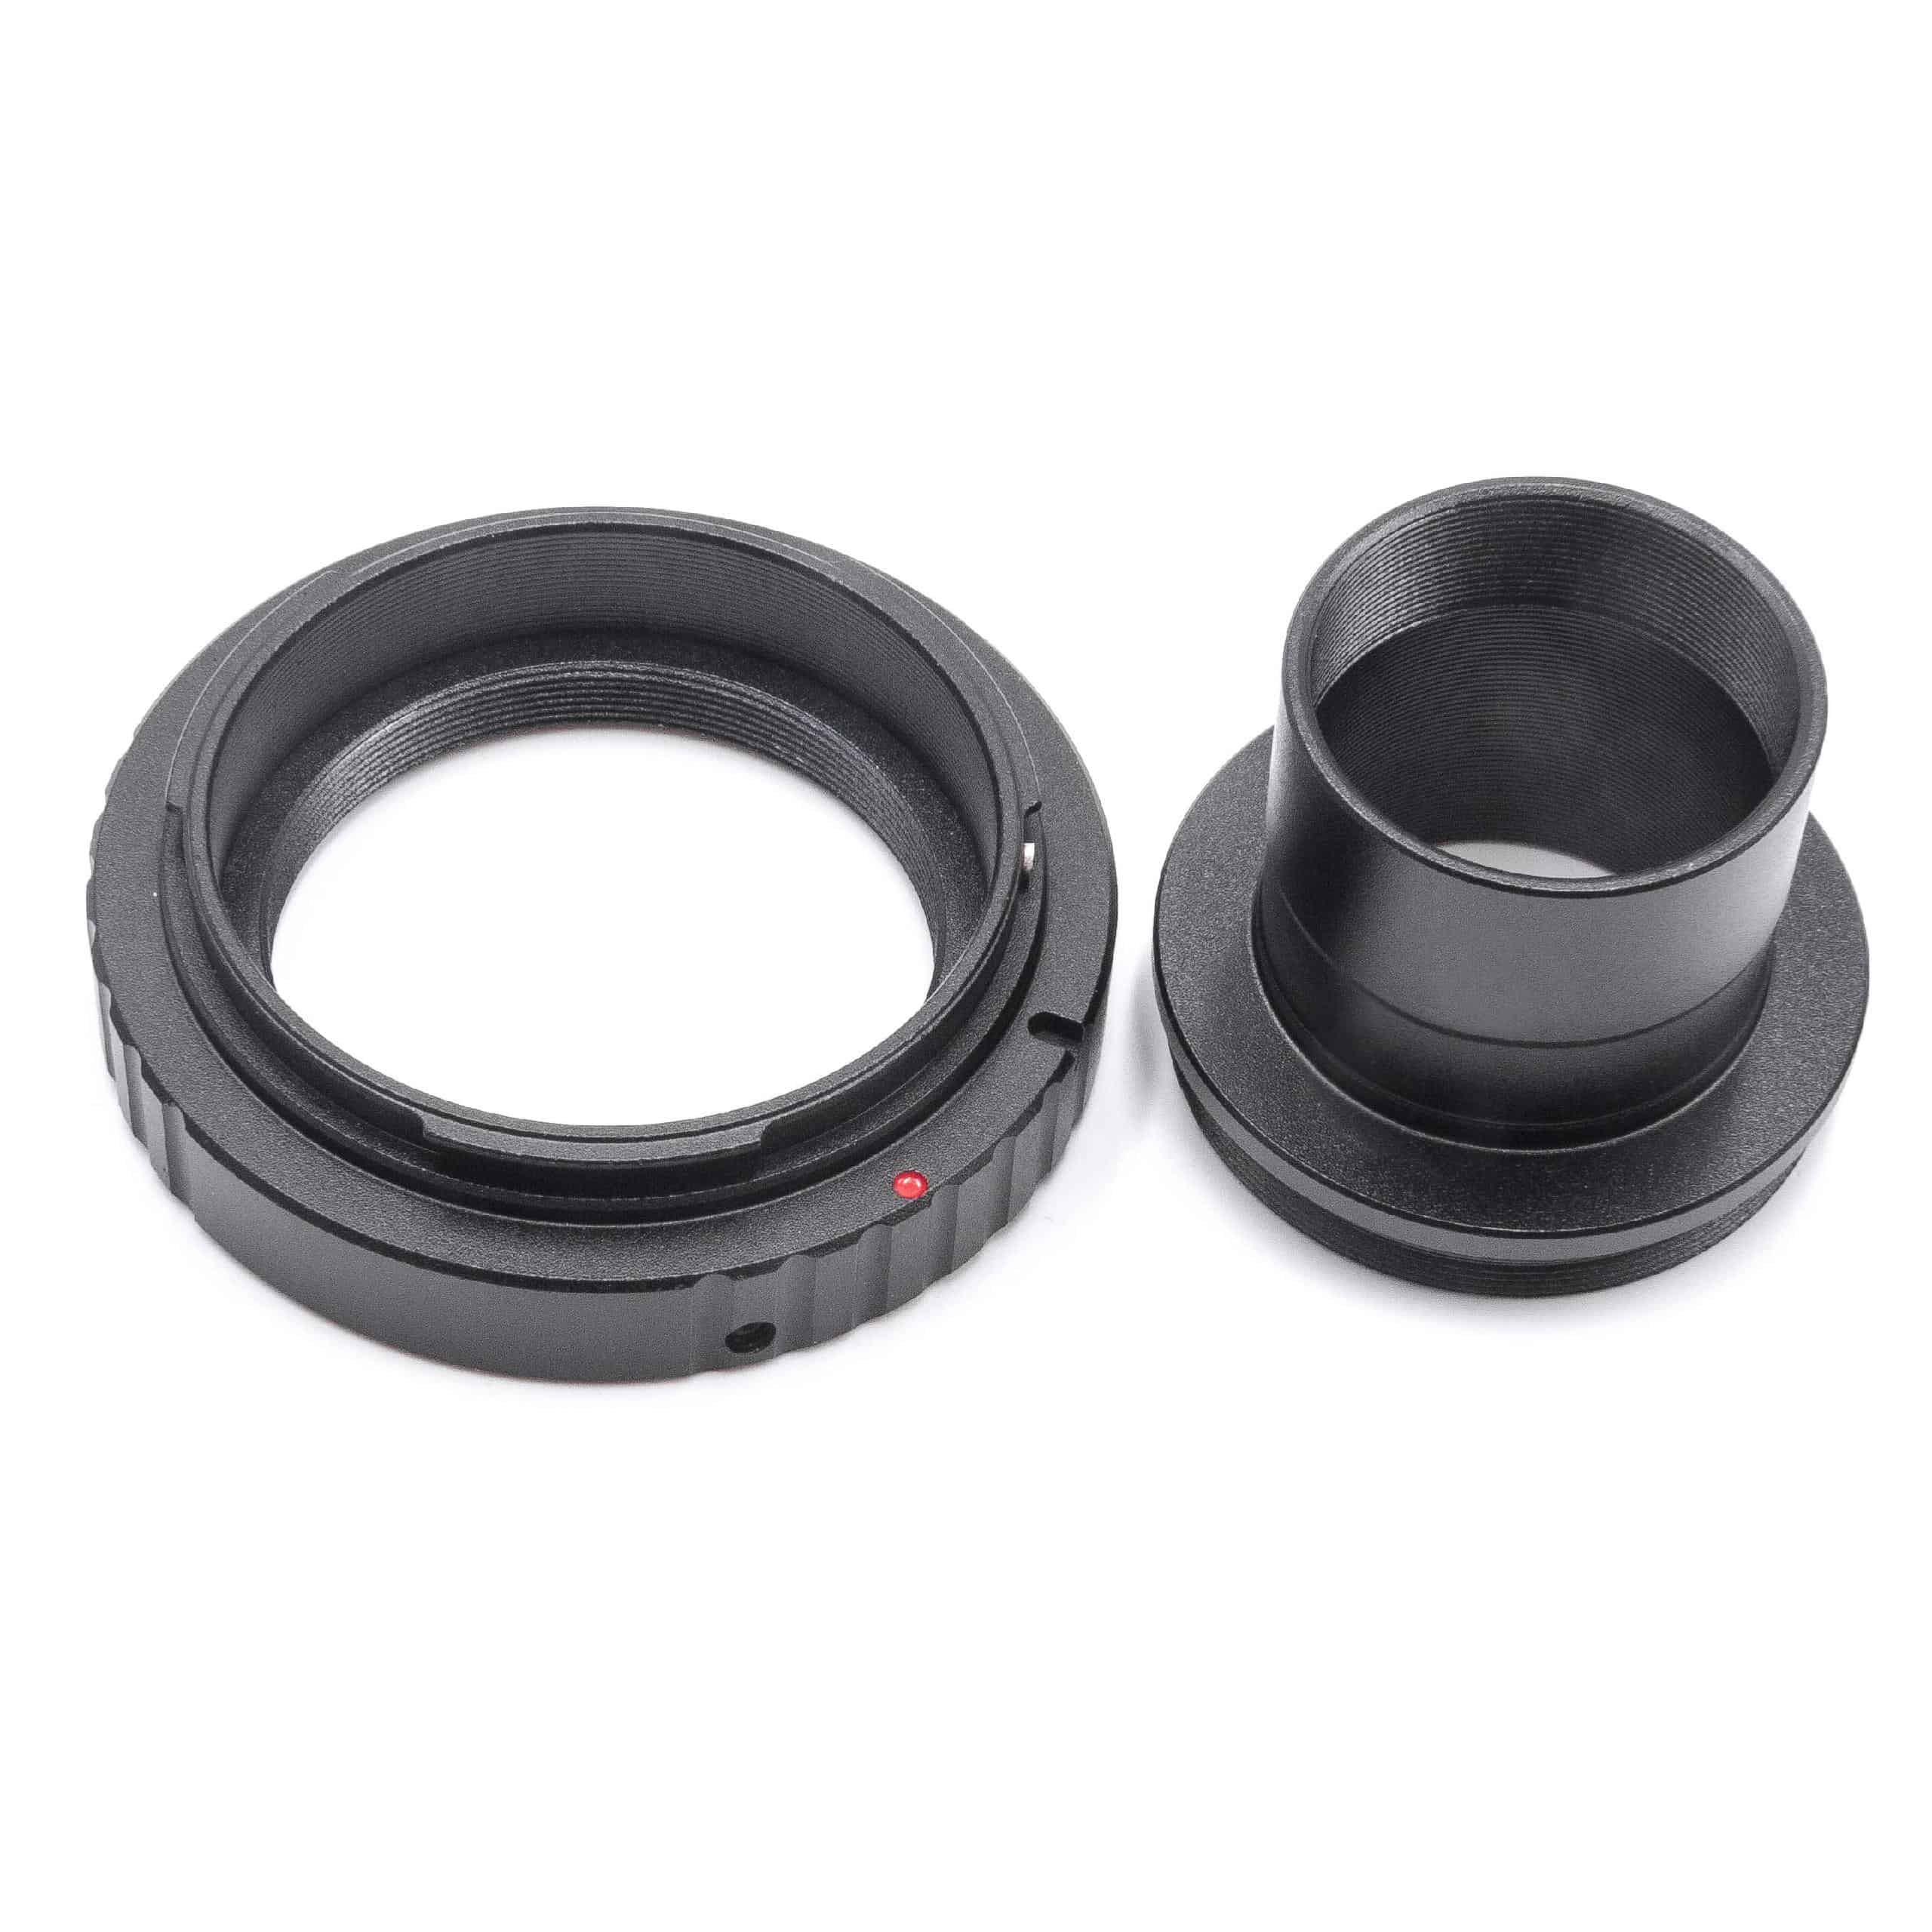 2x Adapter ring, T2-ring adapter, lens mount adapter 1,25" - M42x0.75 suitable for Canon EOS telescop